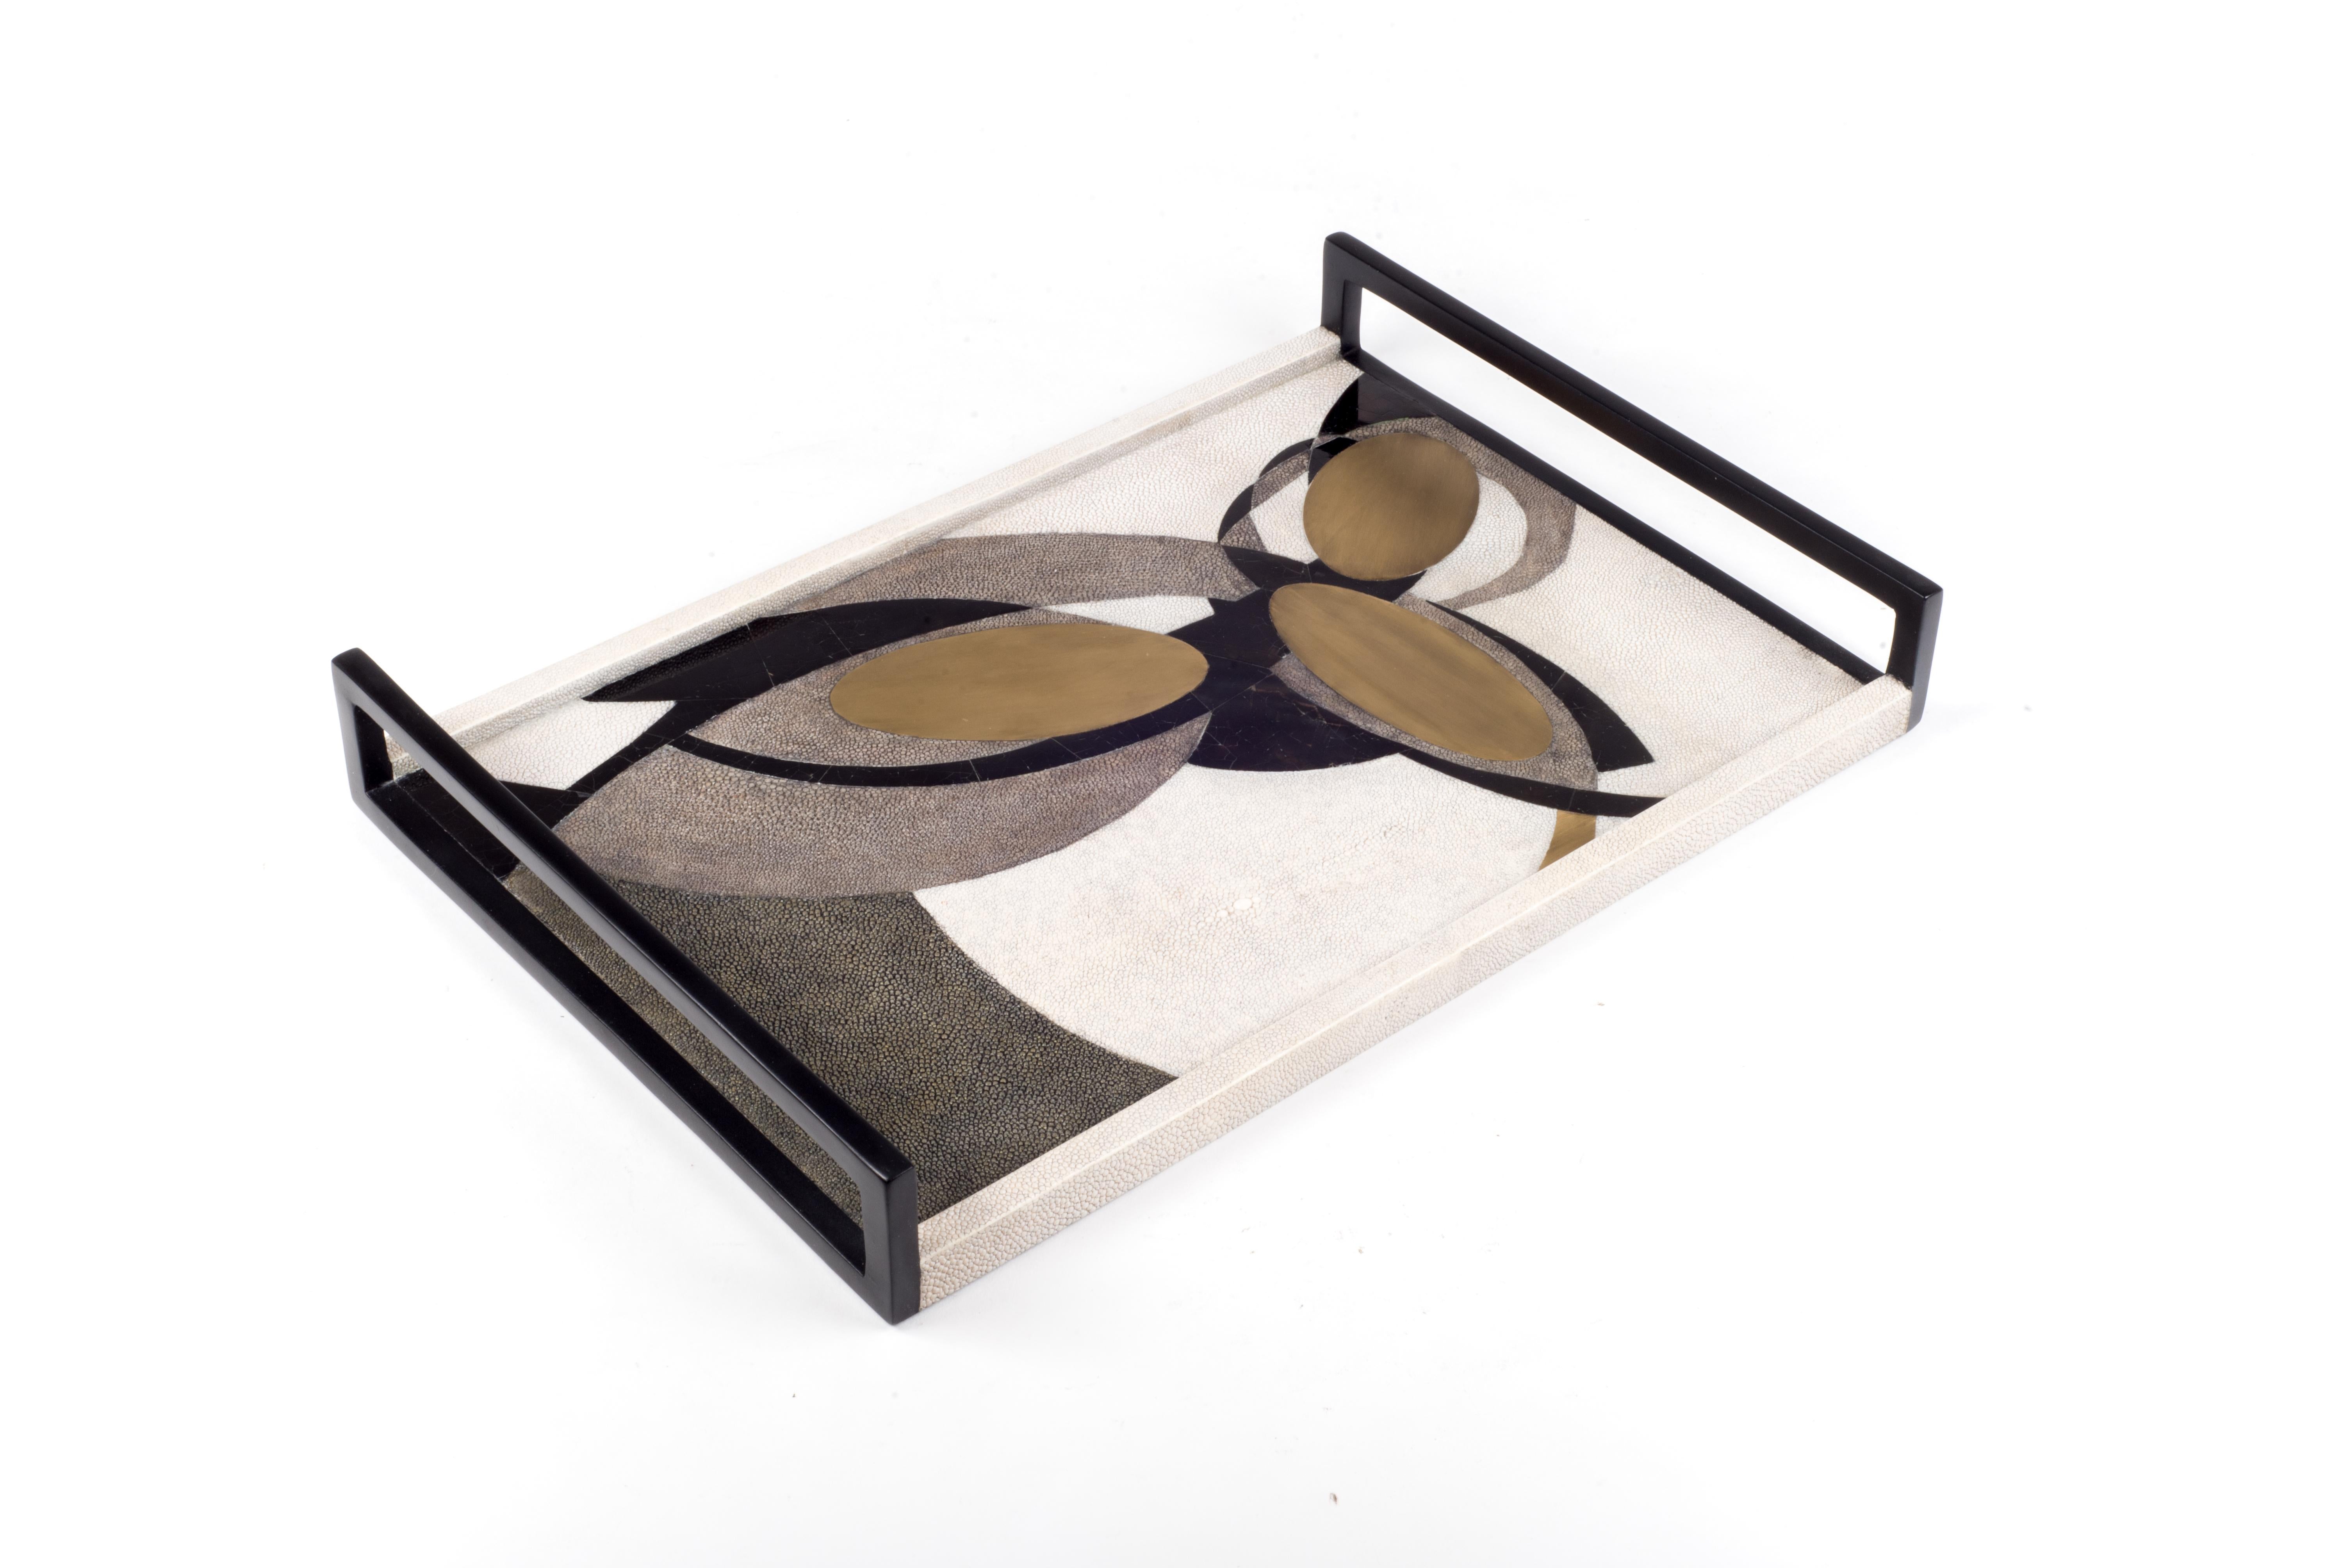 The Lunar dark tray in medium, demonstrates the beautiful signature Augousti inlay work and design aesthetic. This pattern is an abstract interpretation of lunar constellations. Available in other sizes and color variations as well as pattern